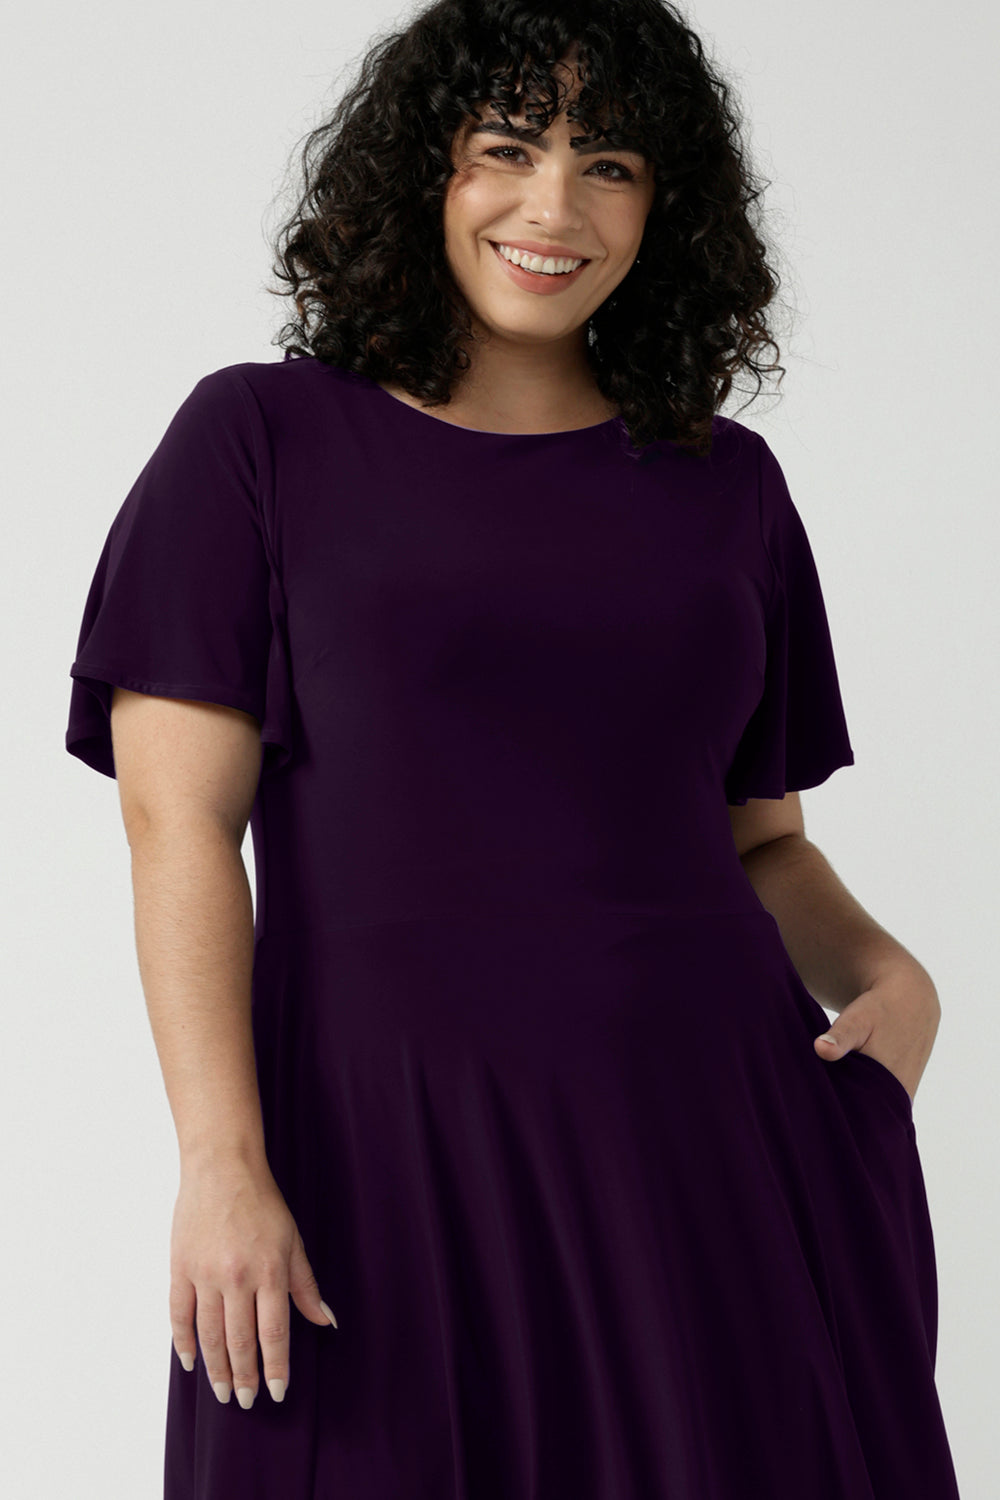 Monique dress in Amethyst. Jersey dress with flutter sleeve and rounded neckline. Full circle skirt and pockets. Made in Australia for women size 8 - 24.